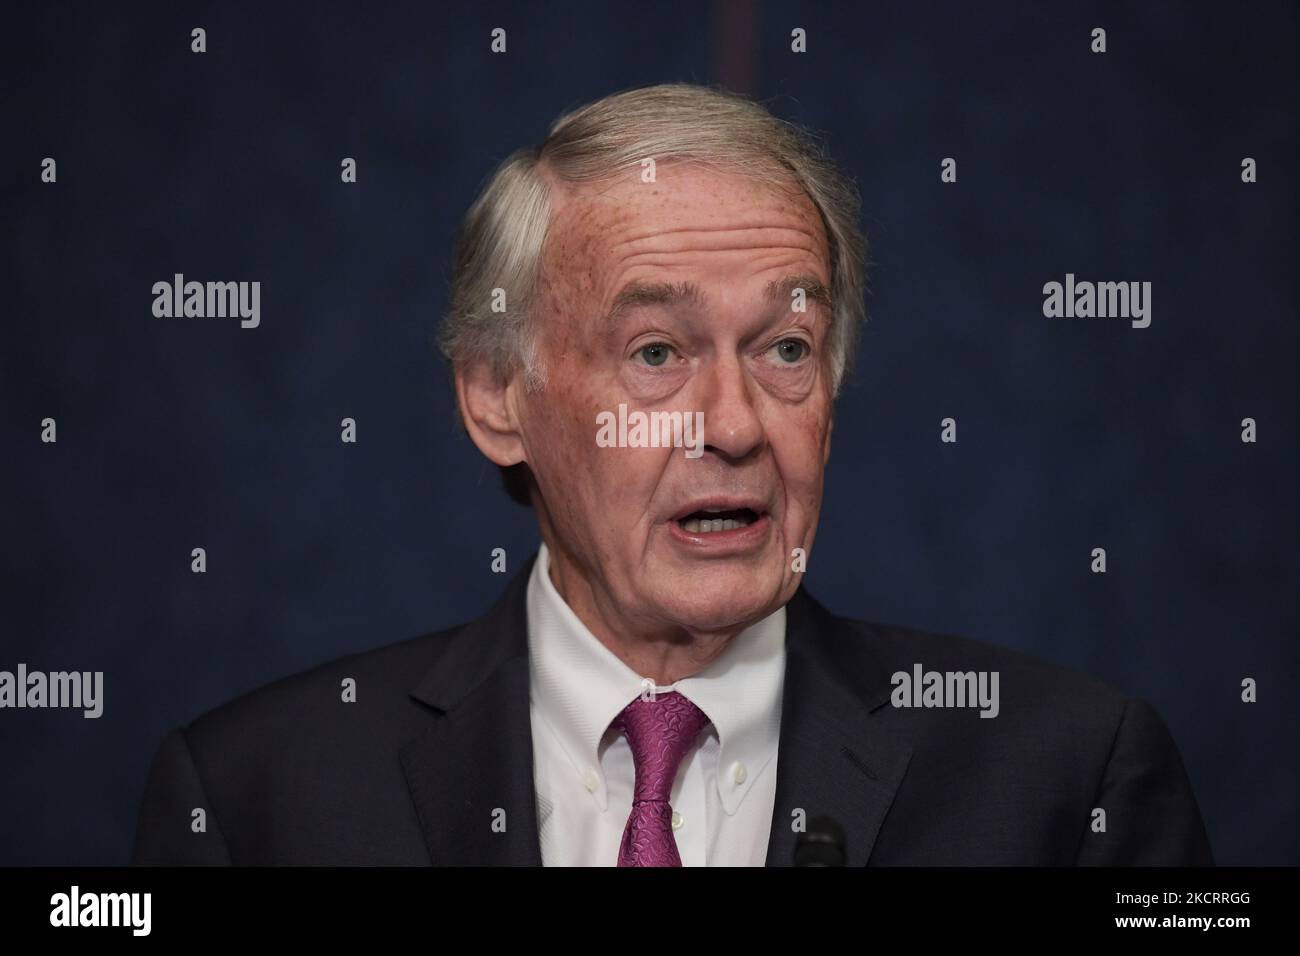 US Senator Ed Markey(D-MA) speaks during a press conference about Online Privacy Protection Act, today on October 27, 2021 at SVC/Capitol Hill in Washington DC, USA. (Photo by Lenin Nolly/NurPhoto) Stock Photo